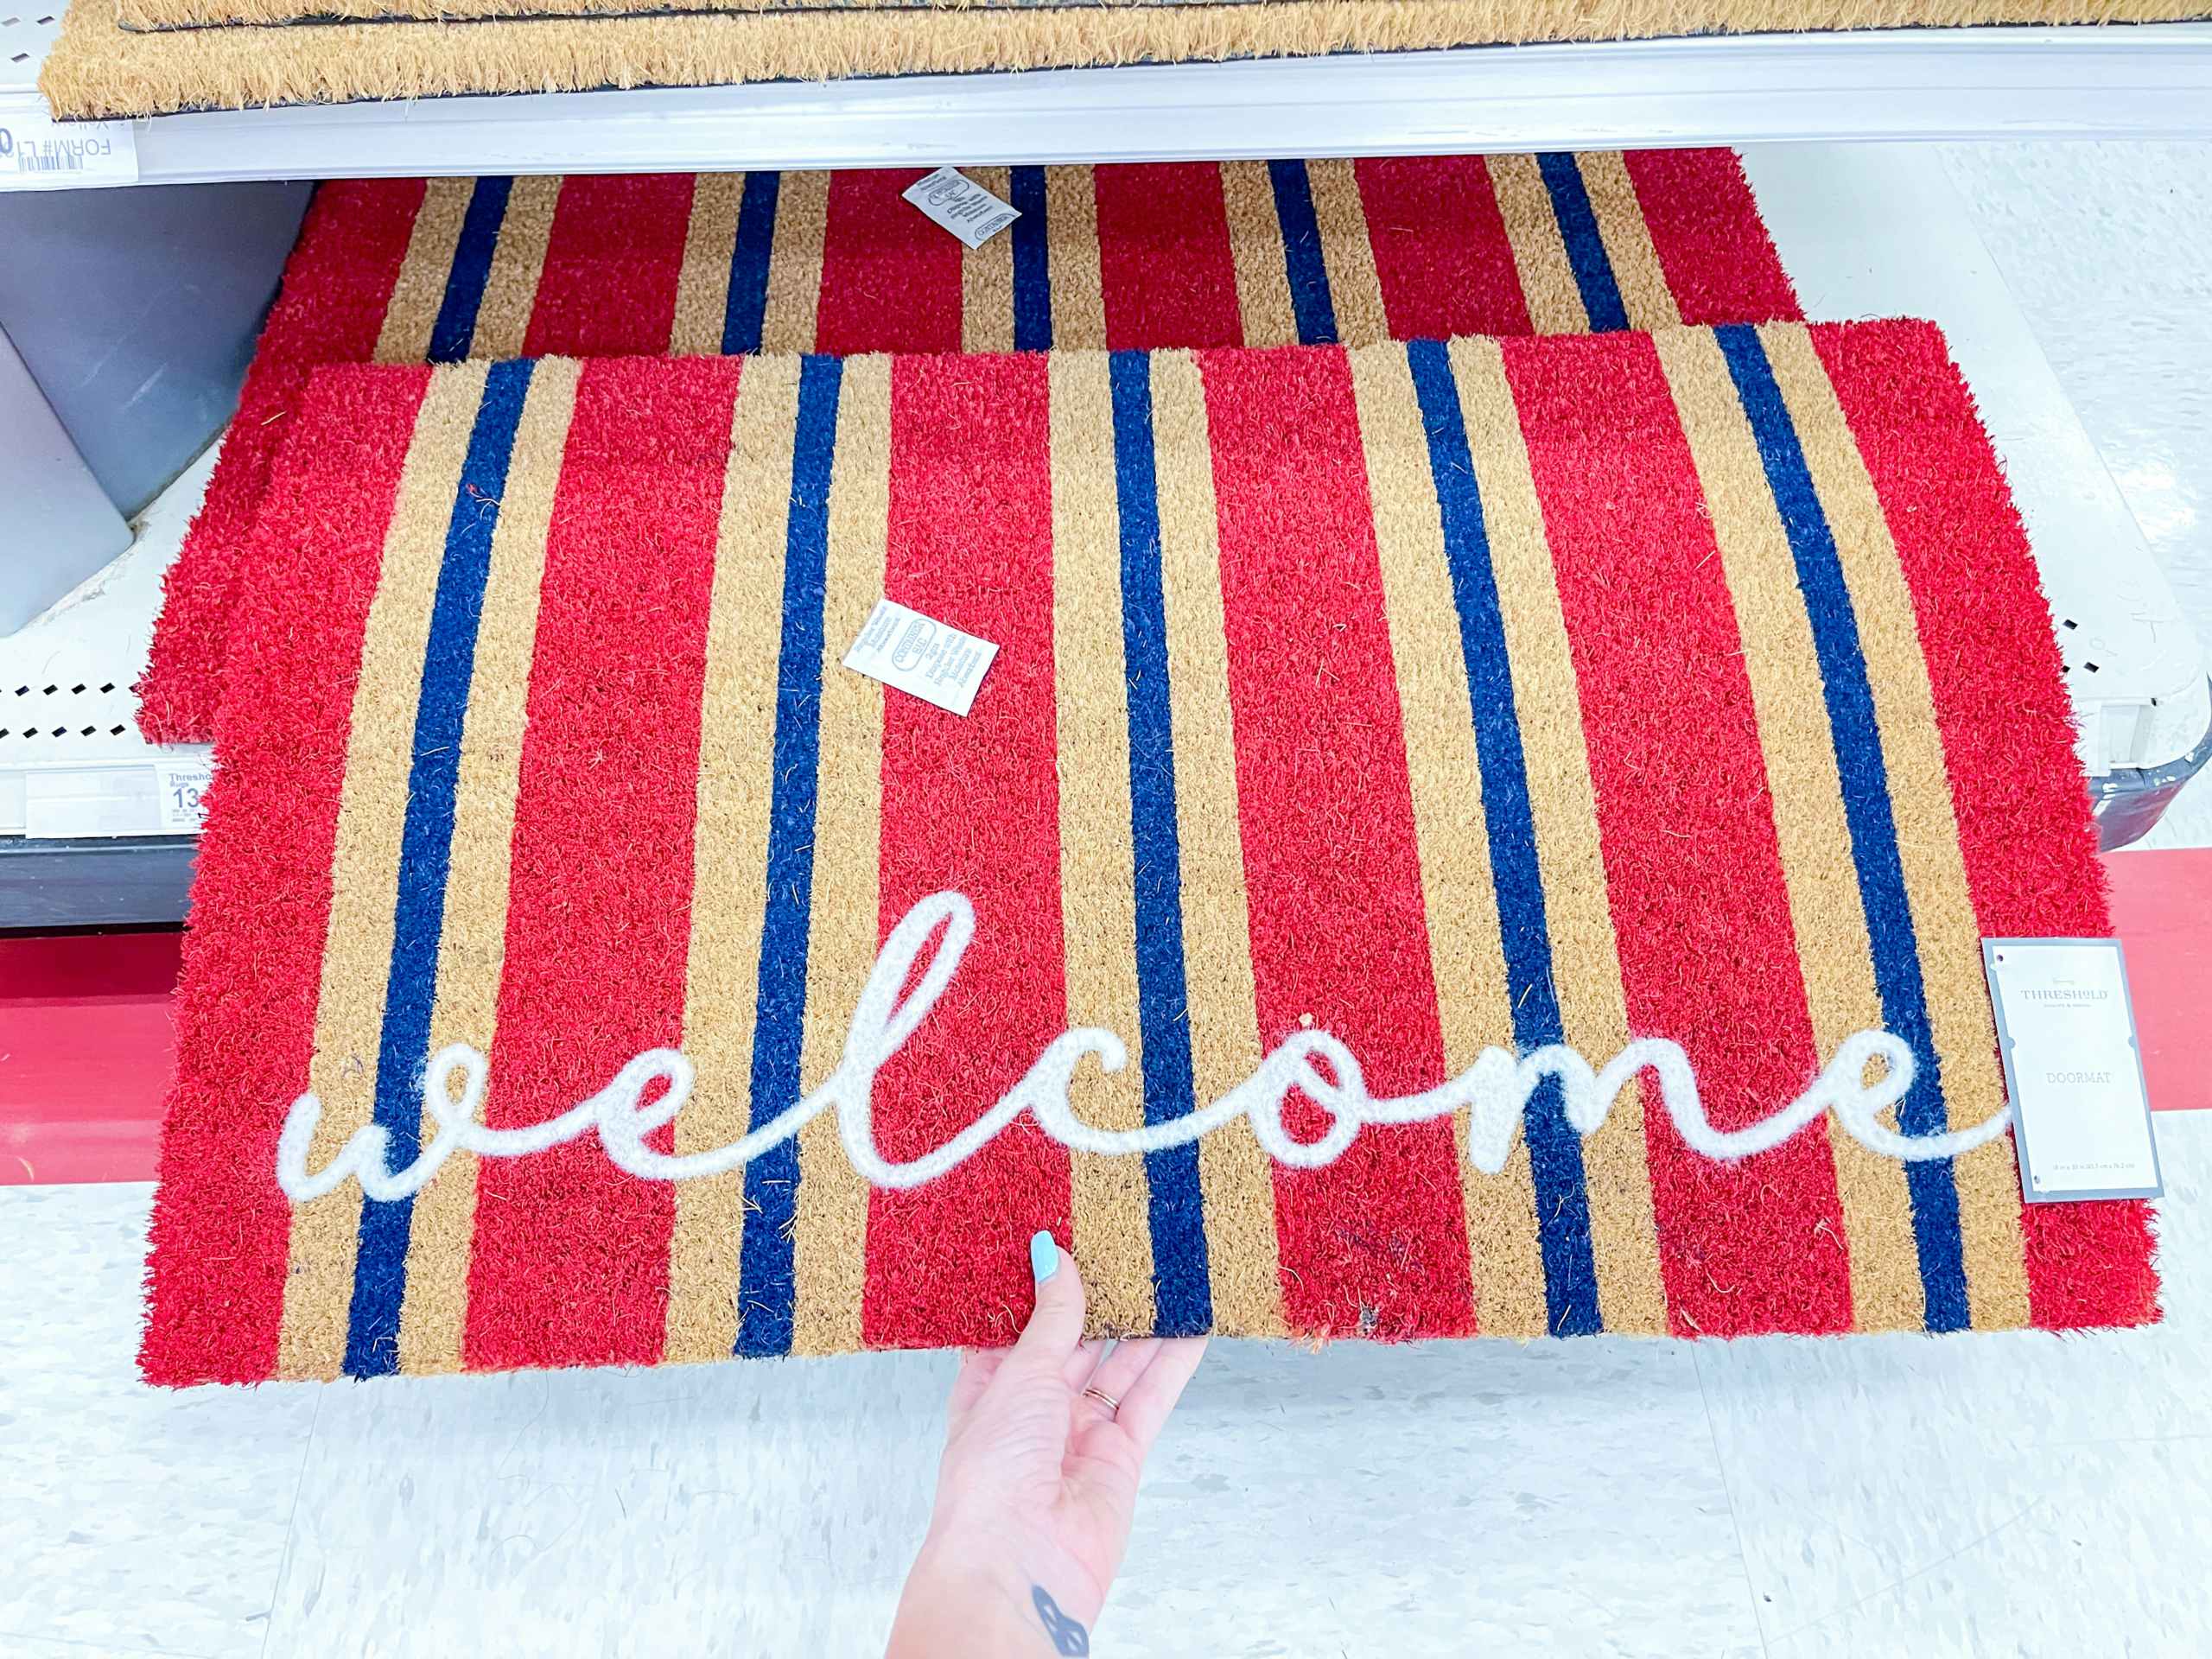 A welcome Mat held out by hand slightly off the store shelf